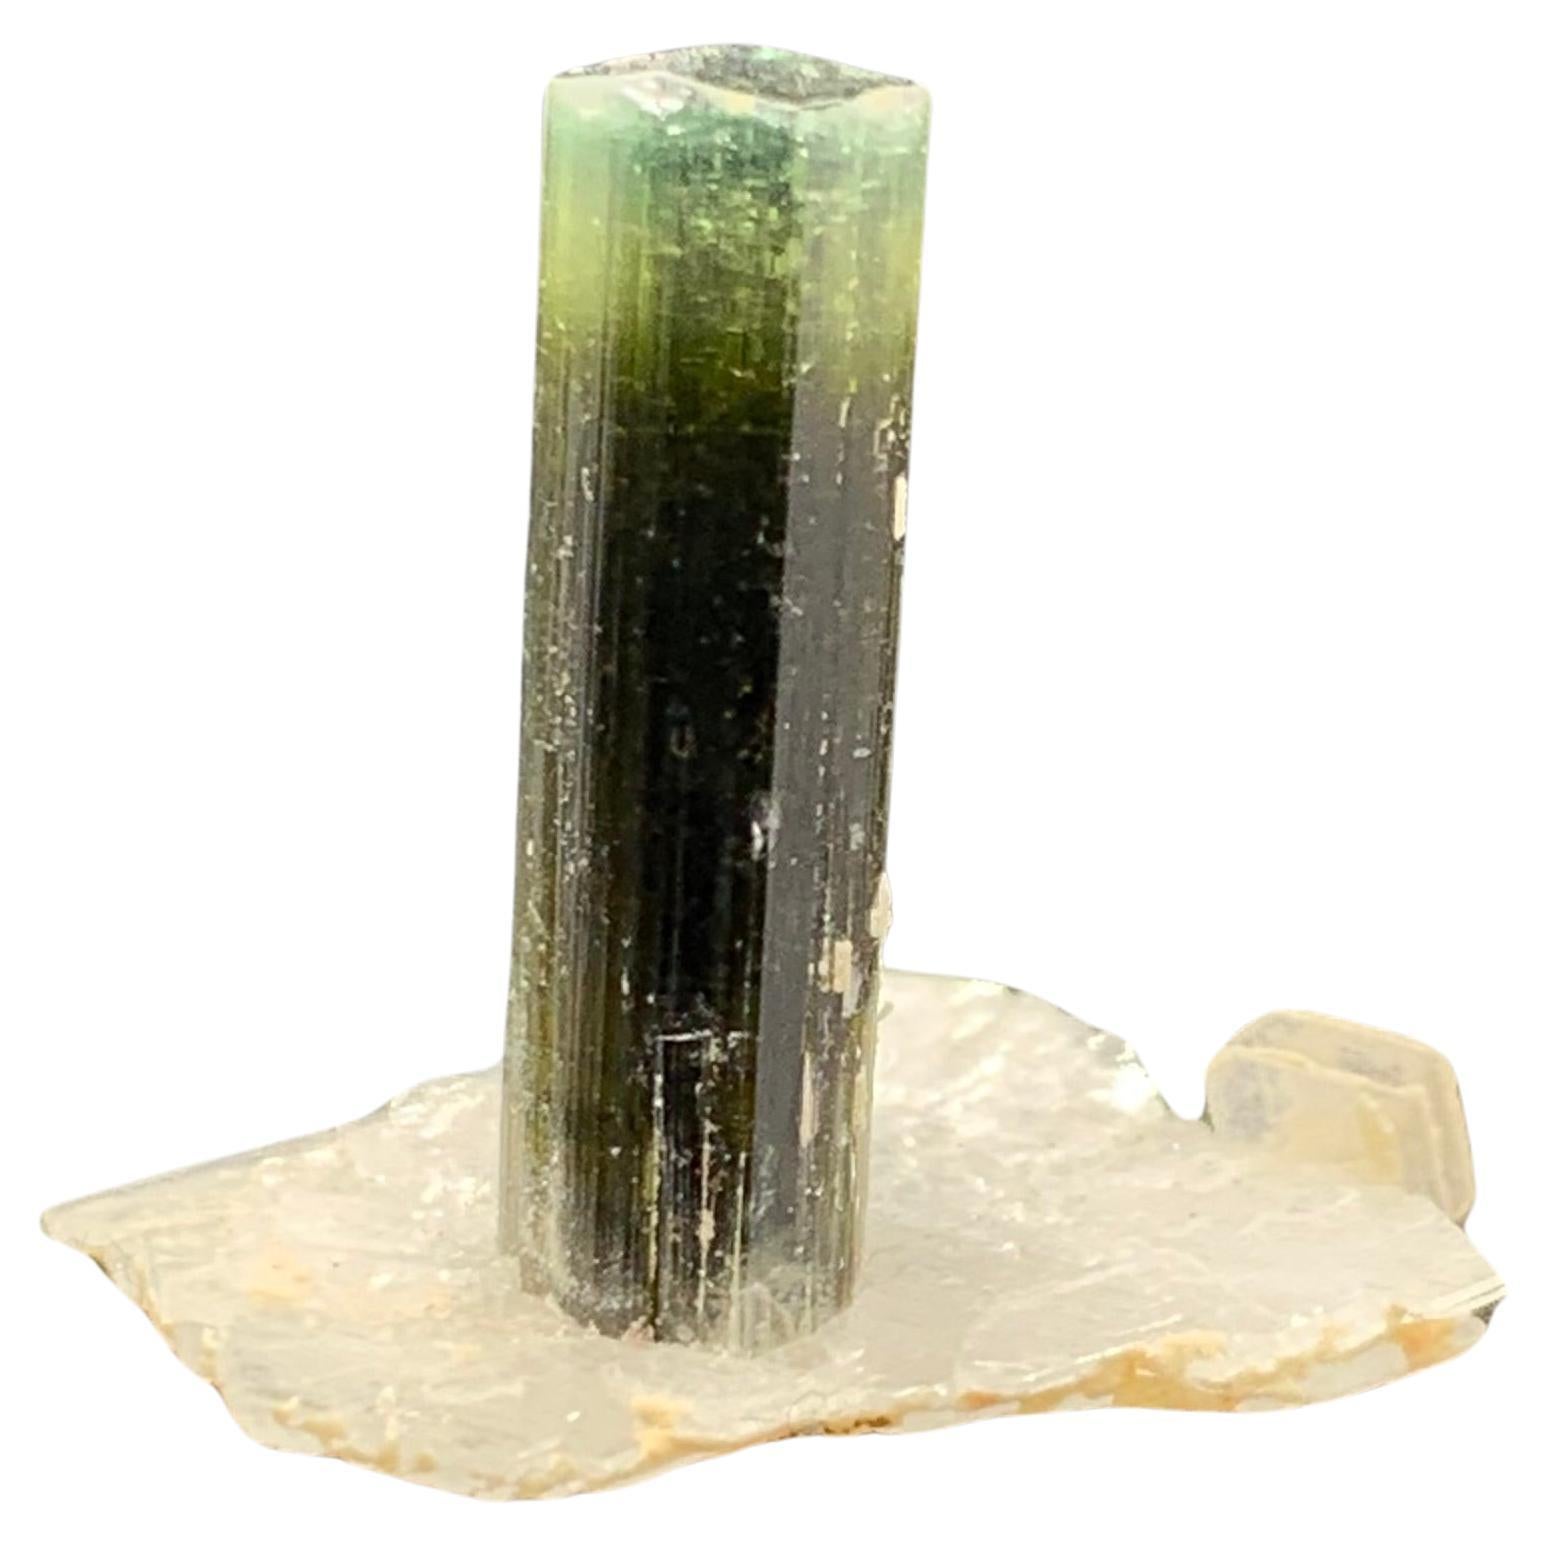 2.56 Gram Elegant Tourmaline Crystal Attached With Albite From Pakistan  For Sale